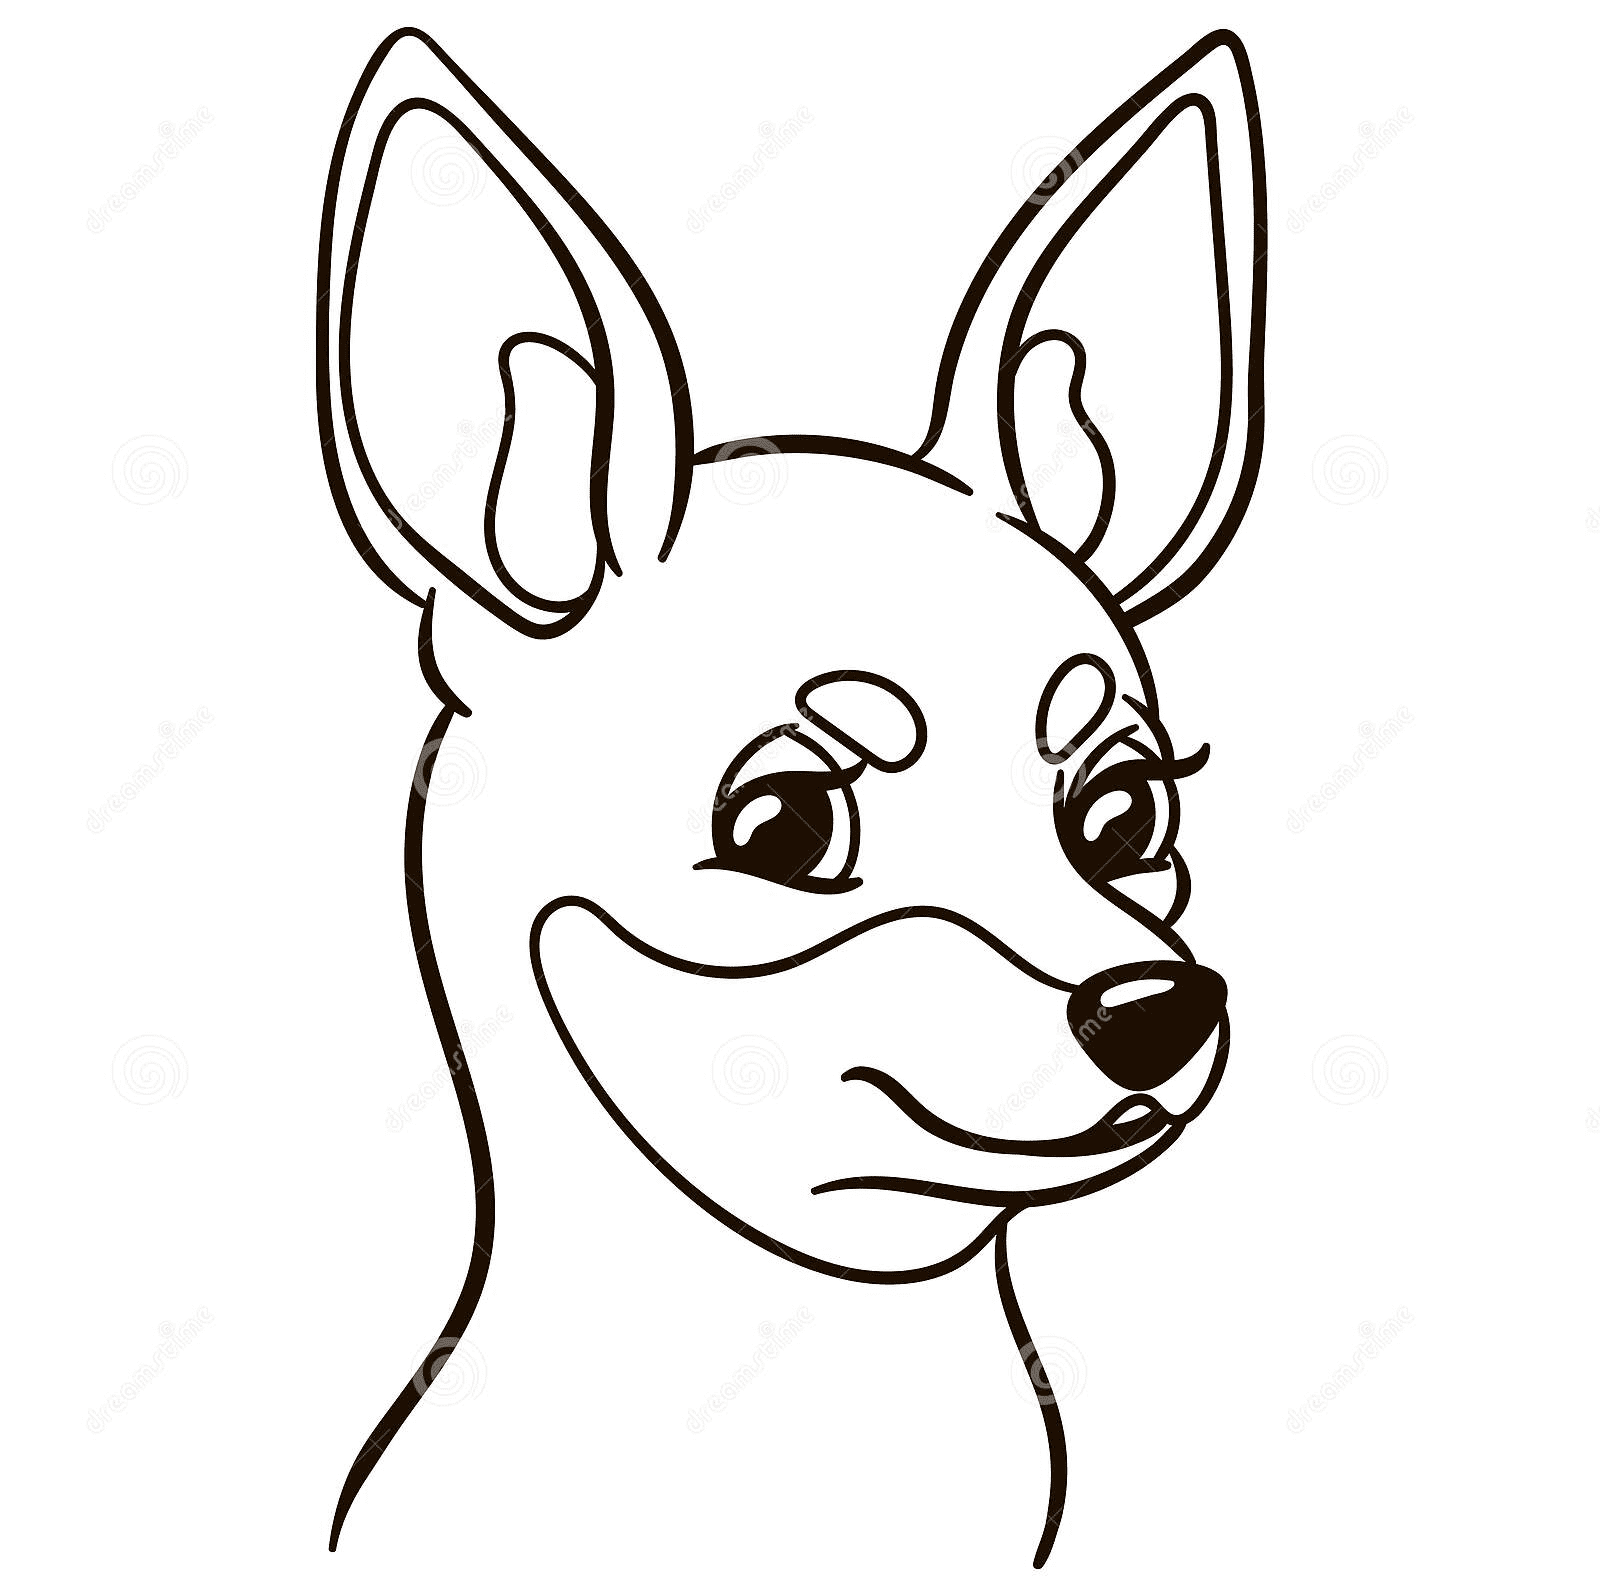 Chihuahua Image For Kids